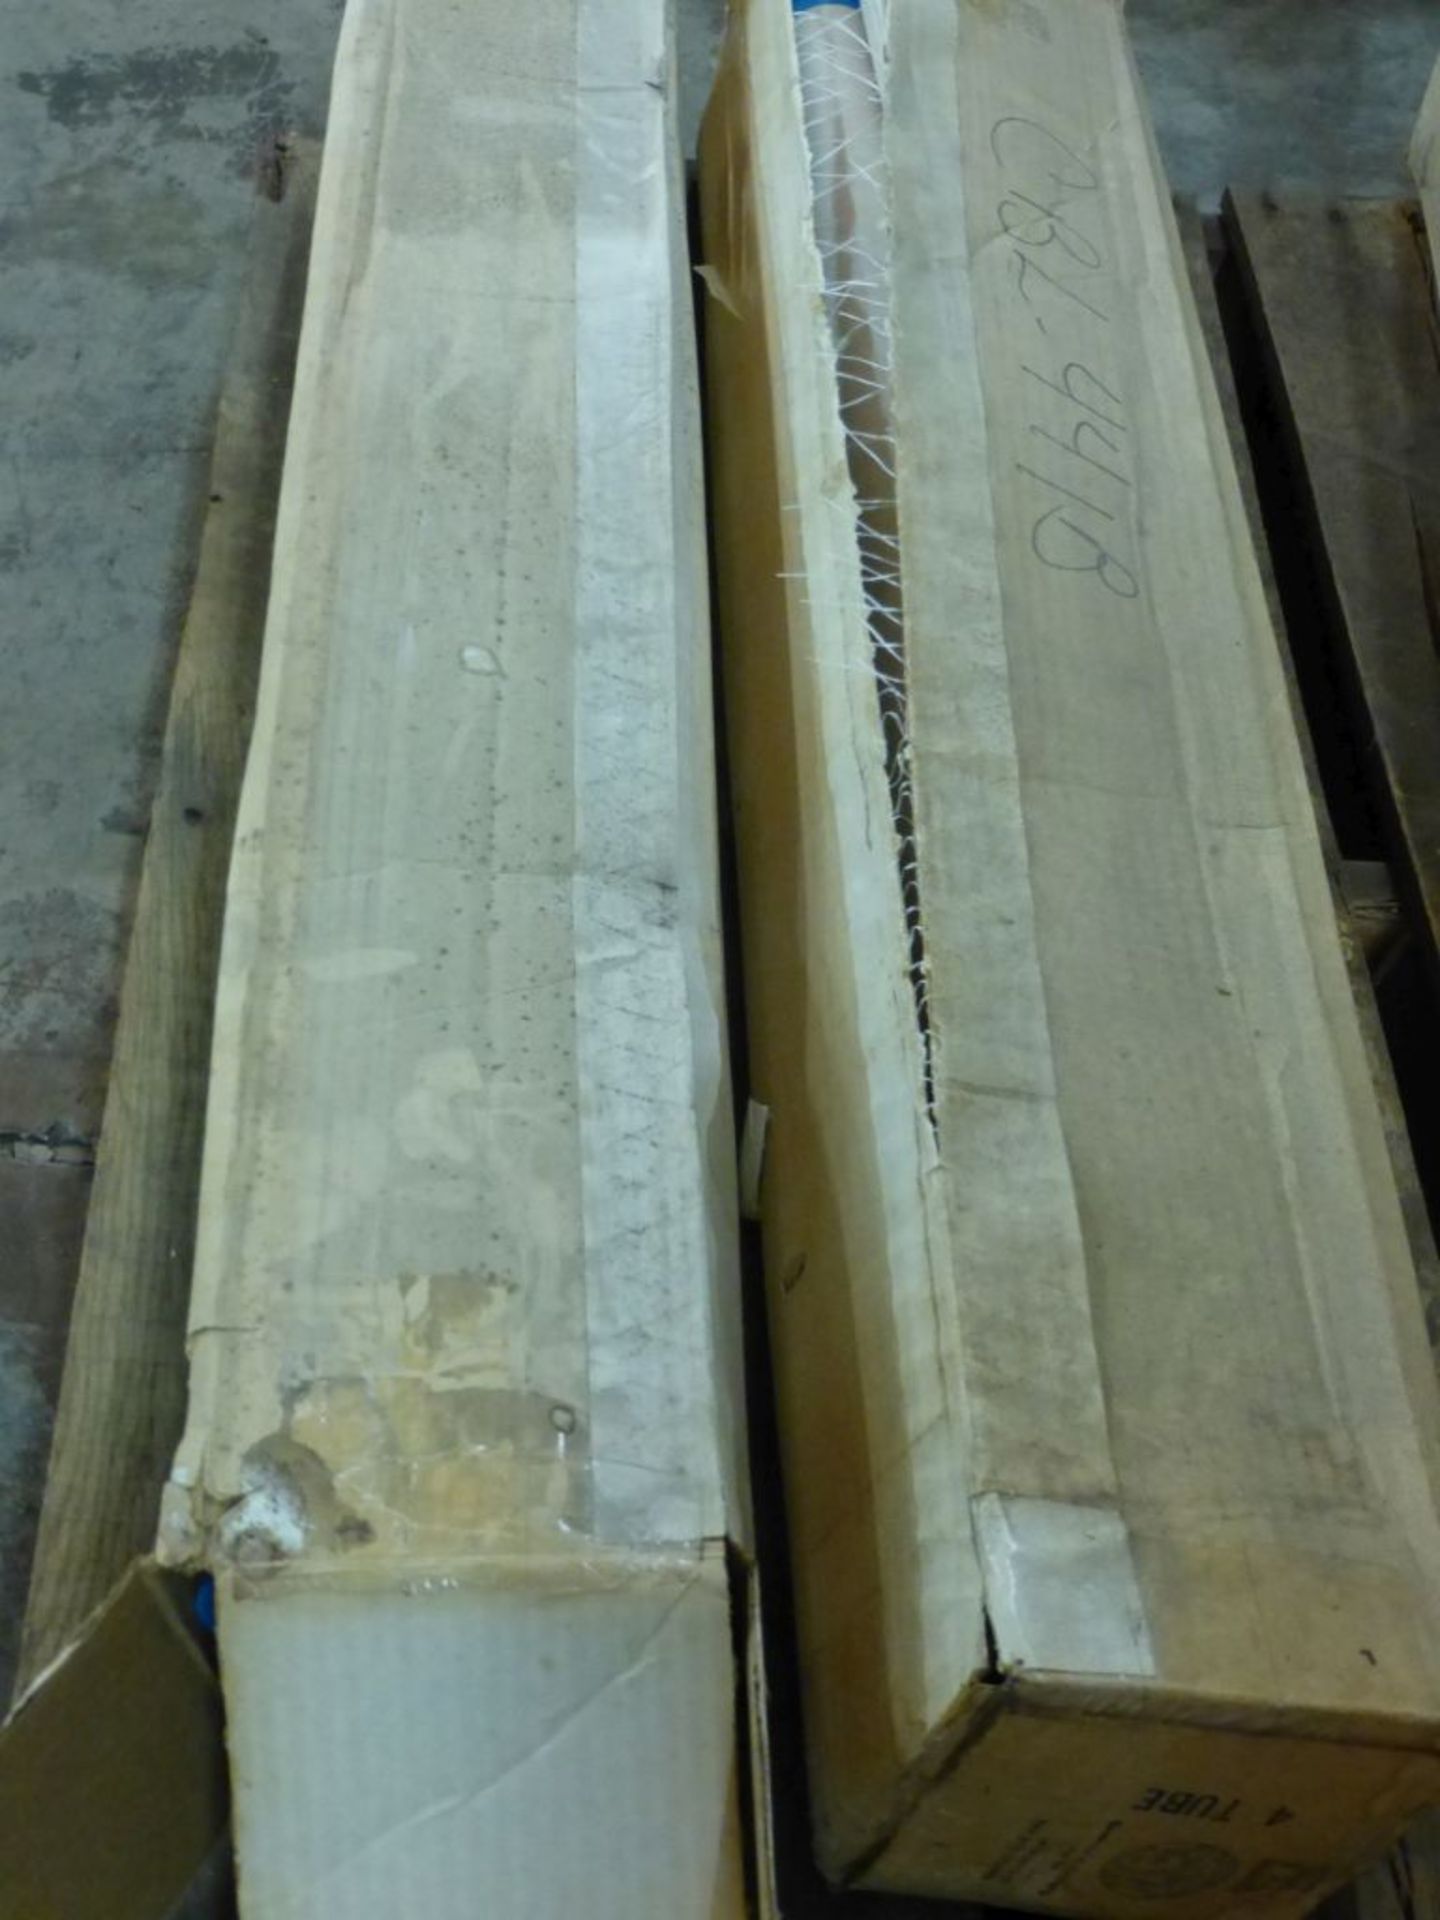 Lot of (2) Boxes of Techalloy Welding Rods|Part No. 20827; Type: ER805-B2; Size: 1/8" x 36"